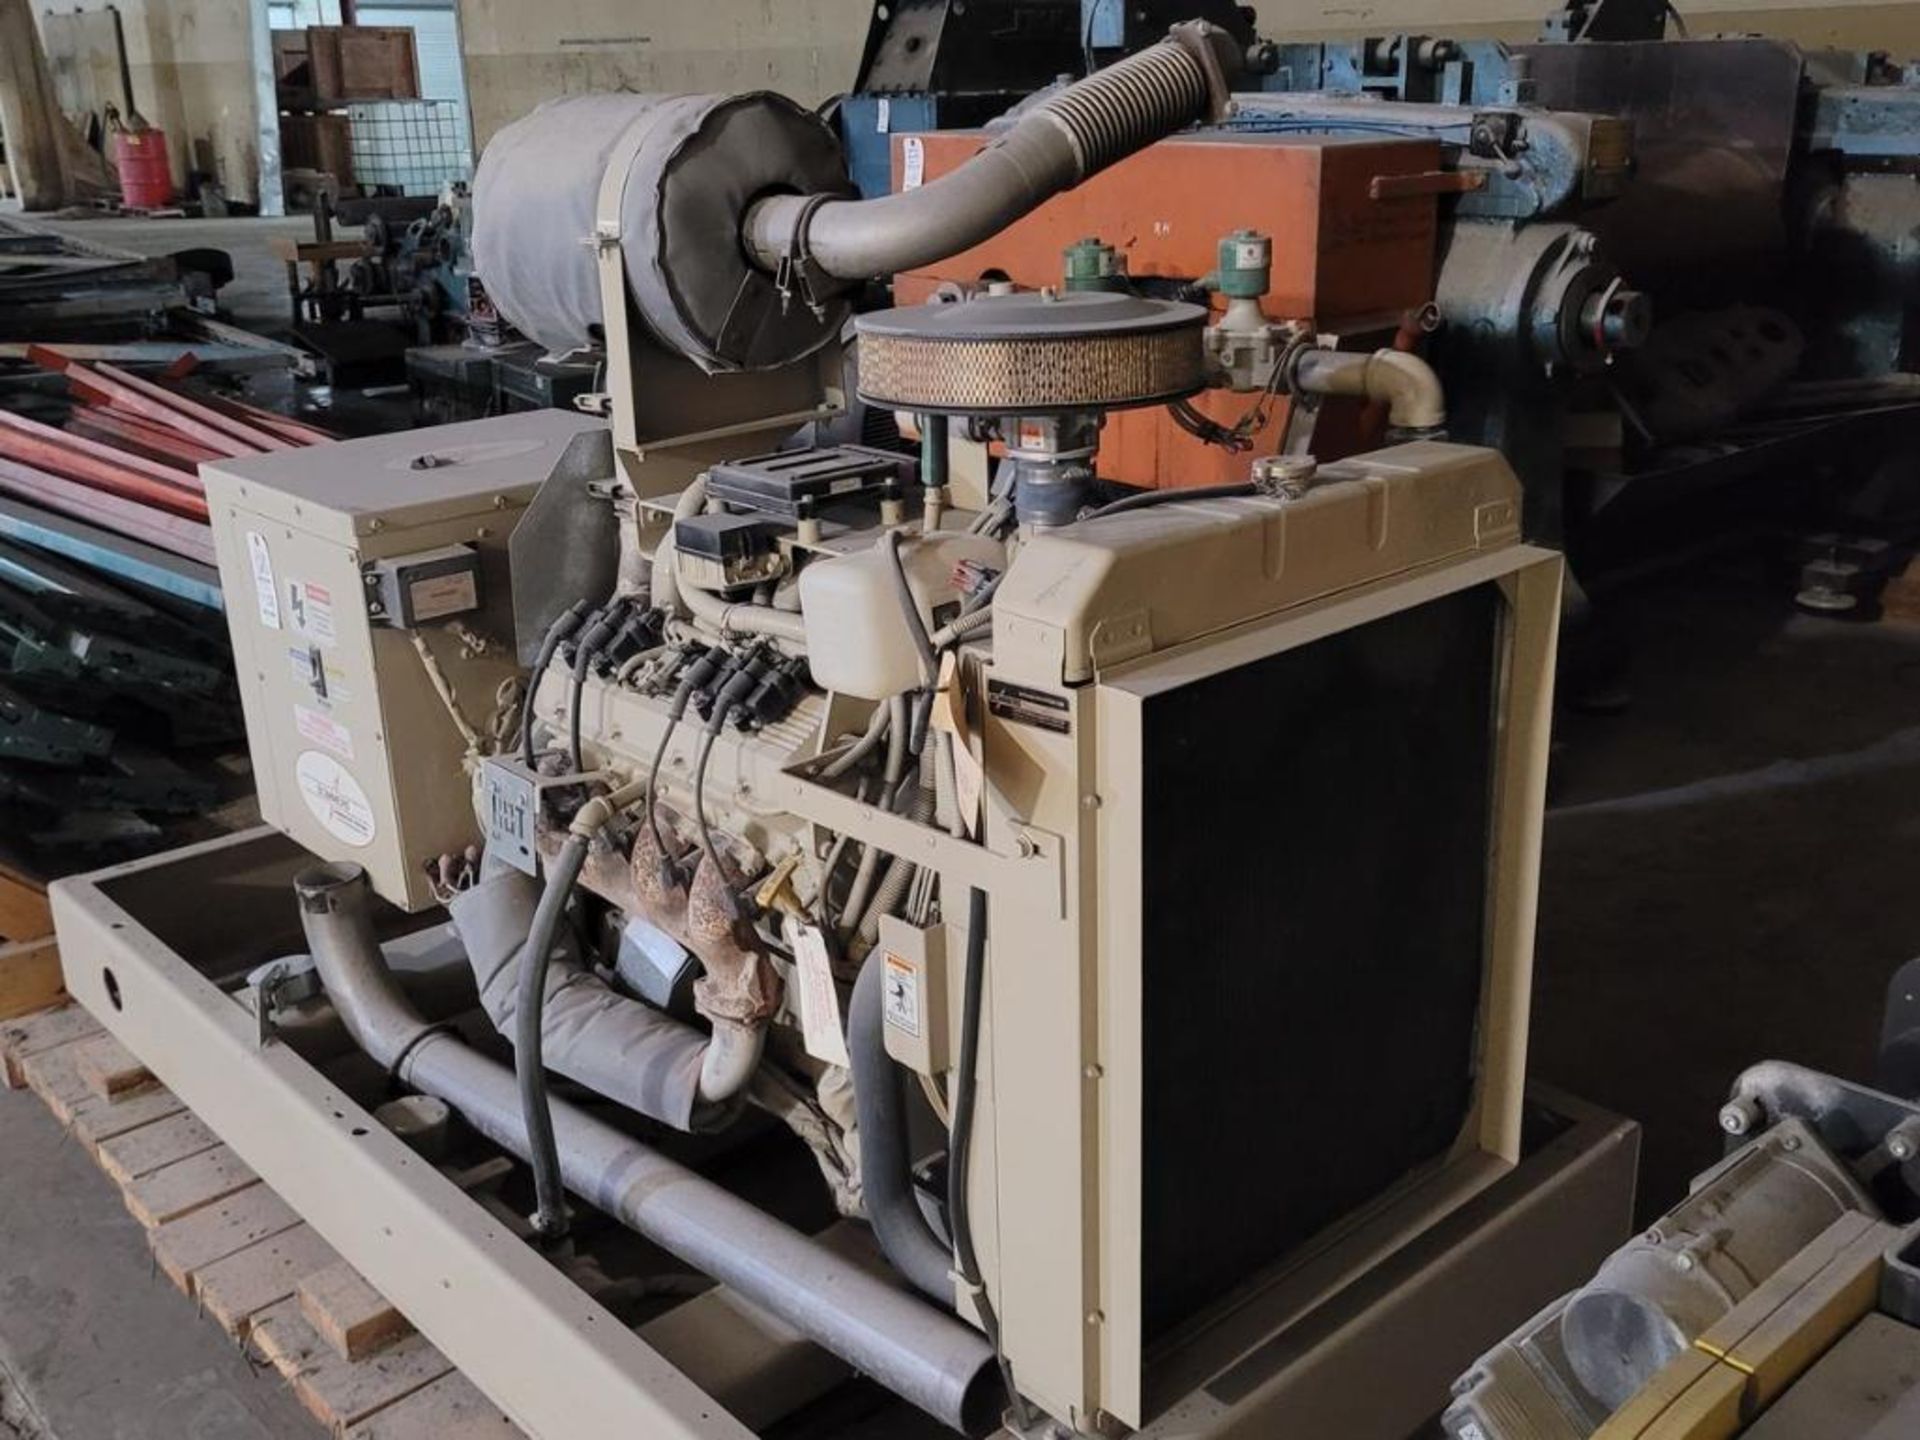 Sommers 80 Kw Diesel Powered Electric Generator: 1800 RPM, 100 KVA, 347/600V, KDGC-500 Controller, W - Image 2 of 7